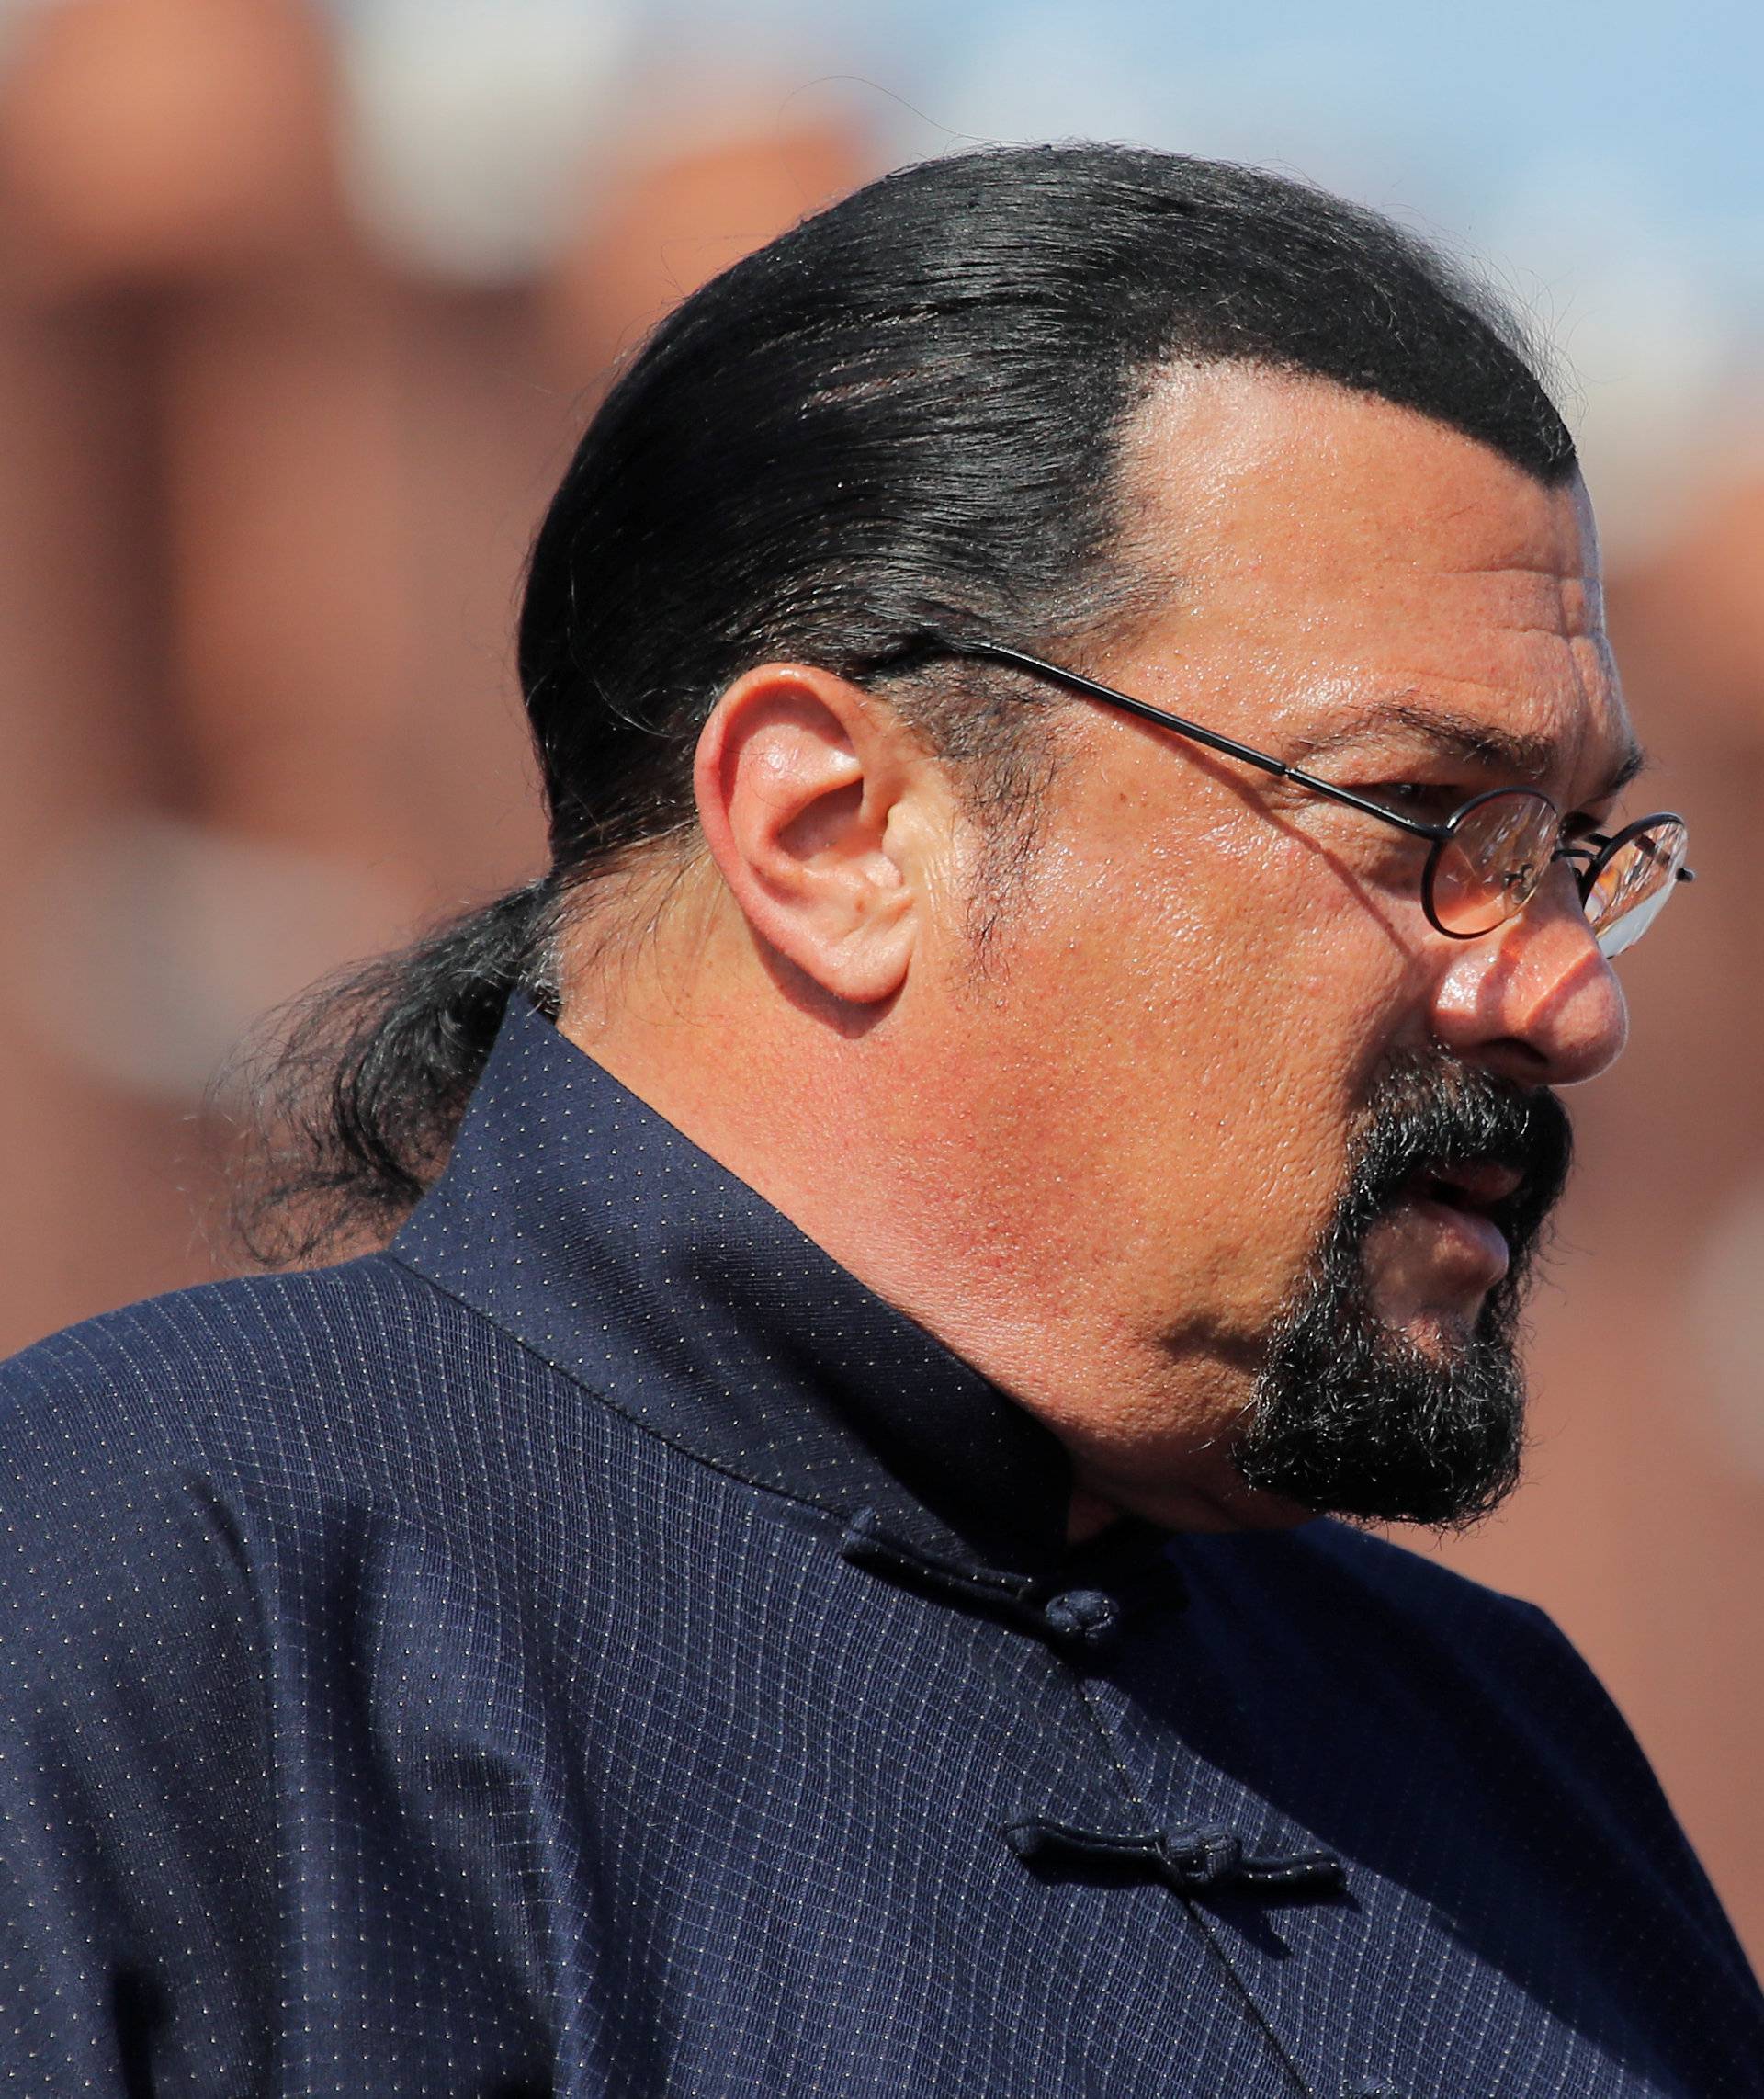 U.S. actor Steven Seagal watches the Victory Day parade at Red Square in Moscow